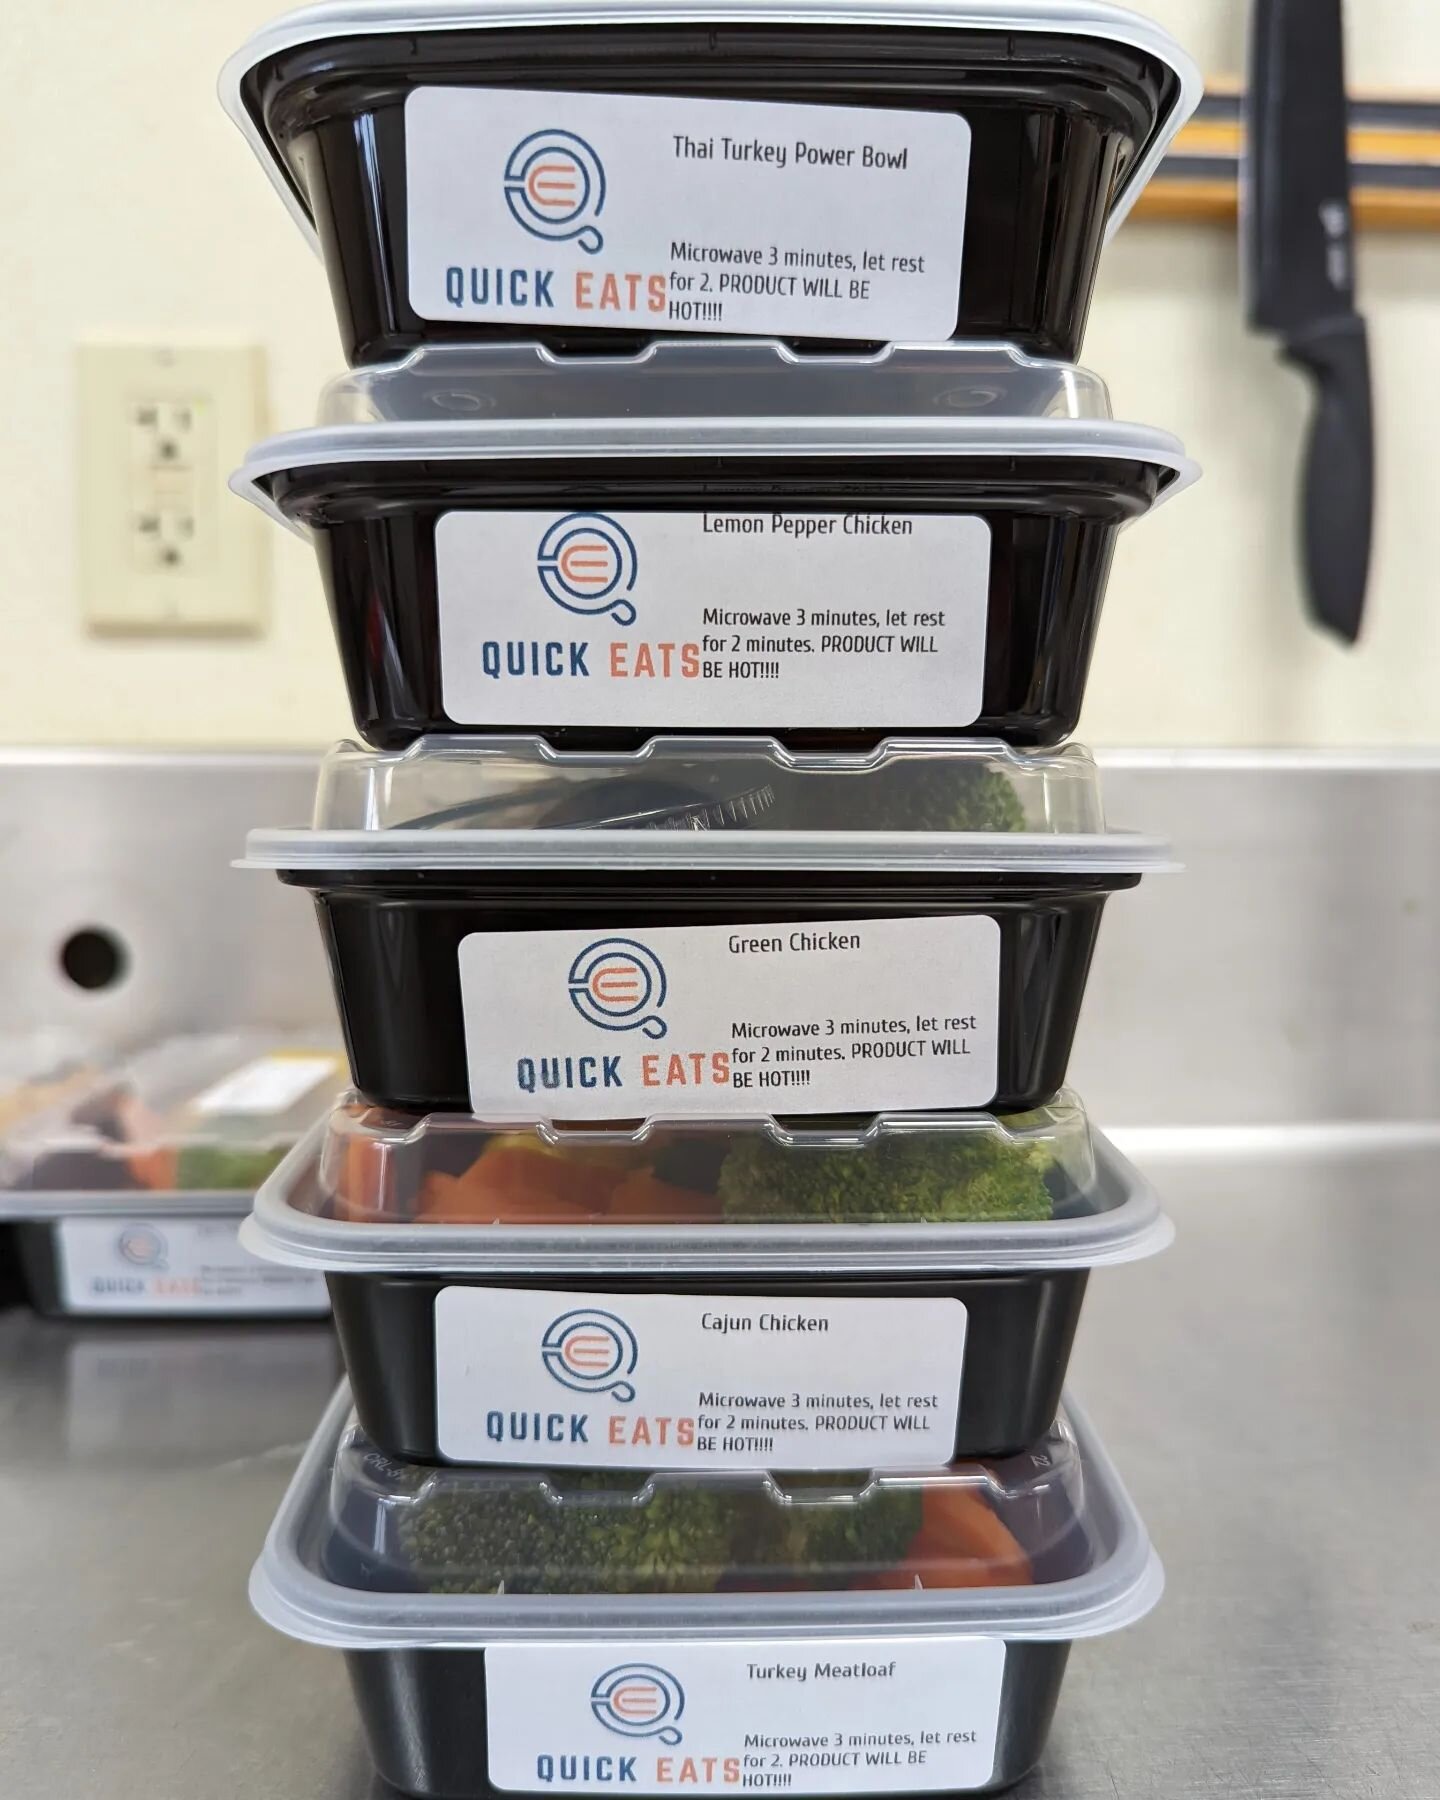 The meal-prep service offers signature meals with four portion options.